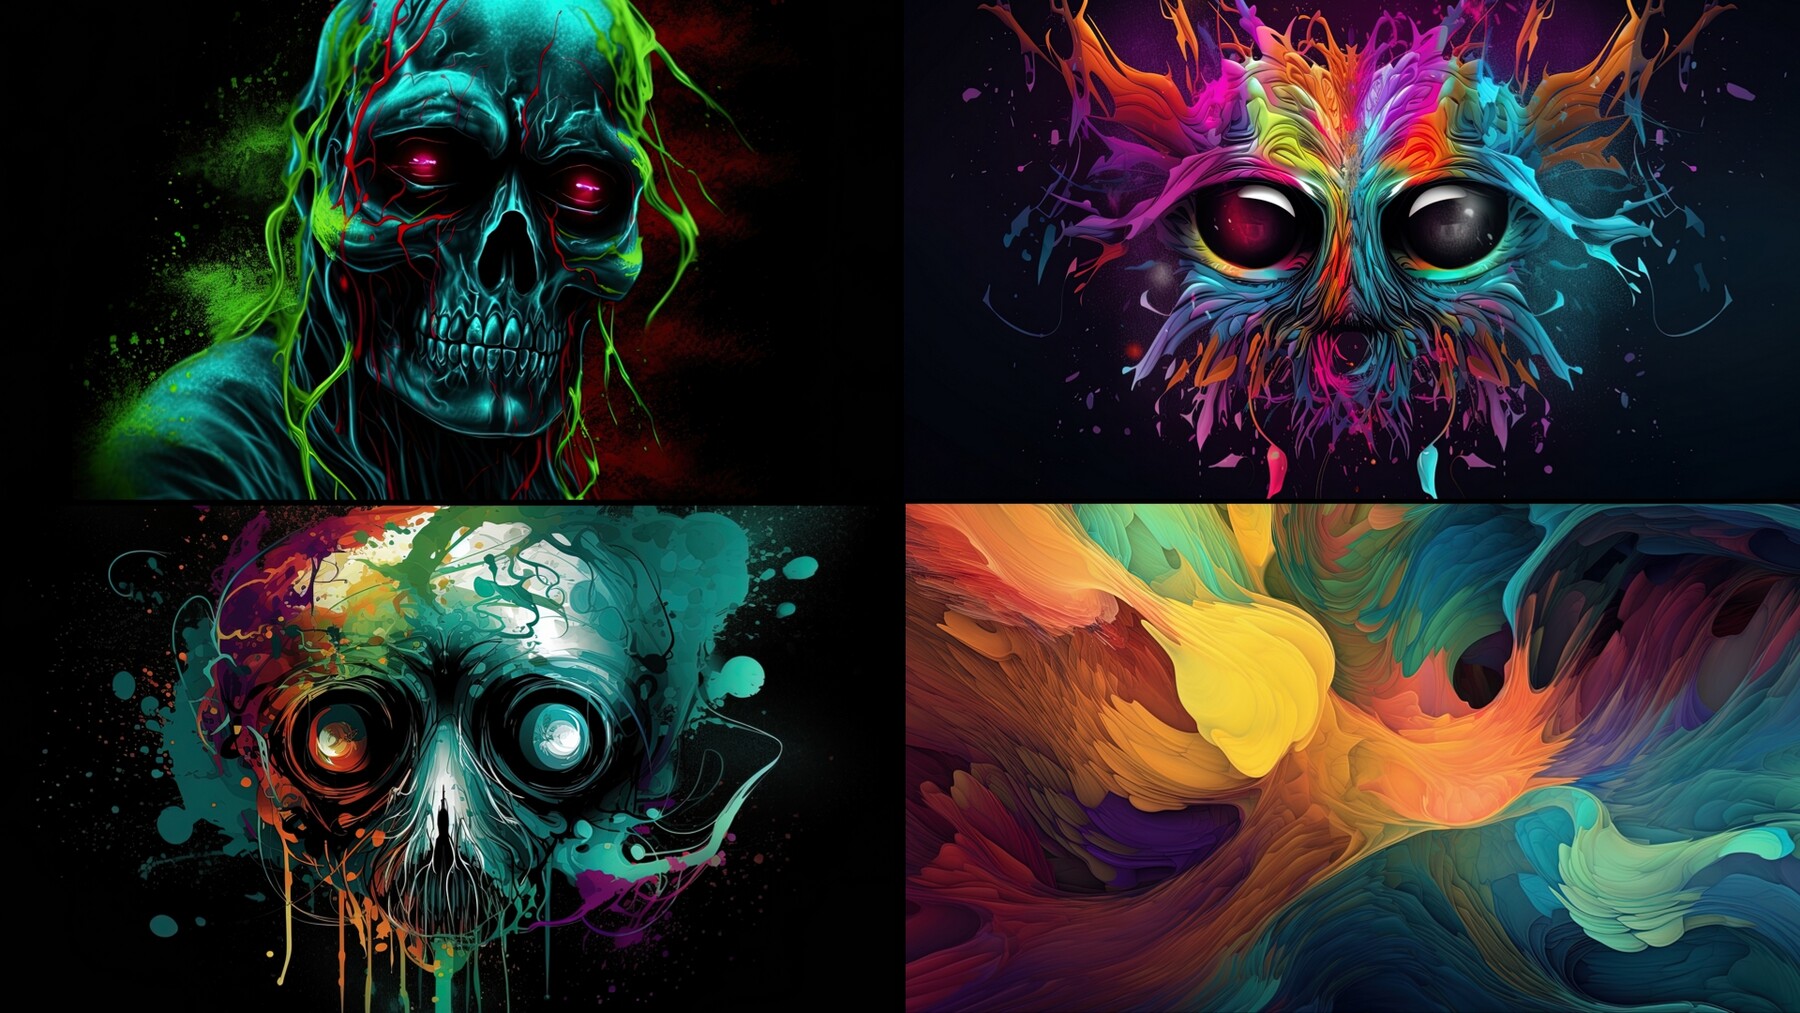 Wallpapers 8K by Nosakhare Ogbebor